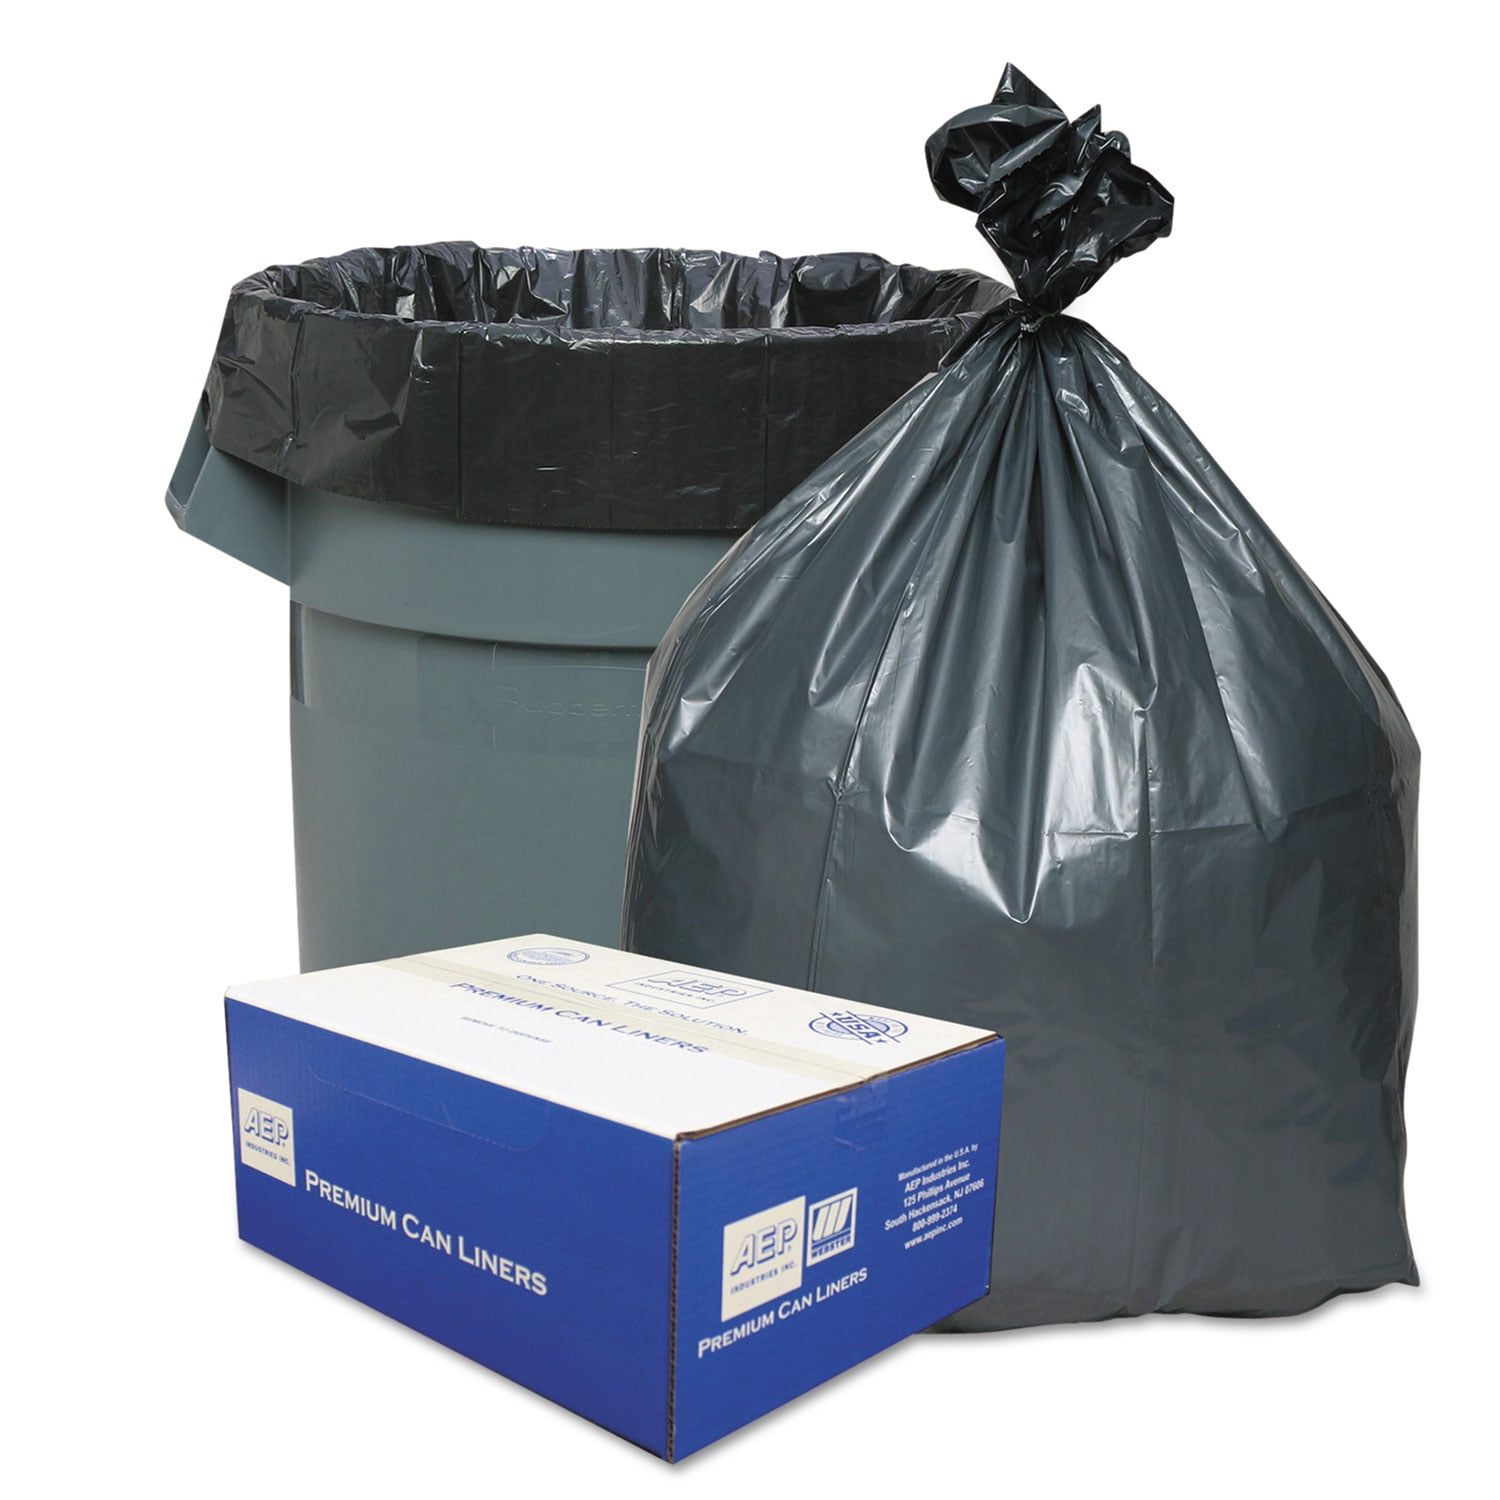 PlasticMill 100 Gallon 1.3 Mil Trash Can Liners for Outdoor, Municipal, or Township Garbage Cans, 10 Bags - Case